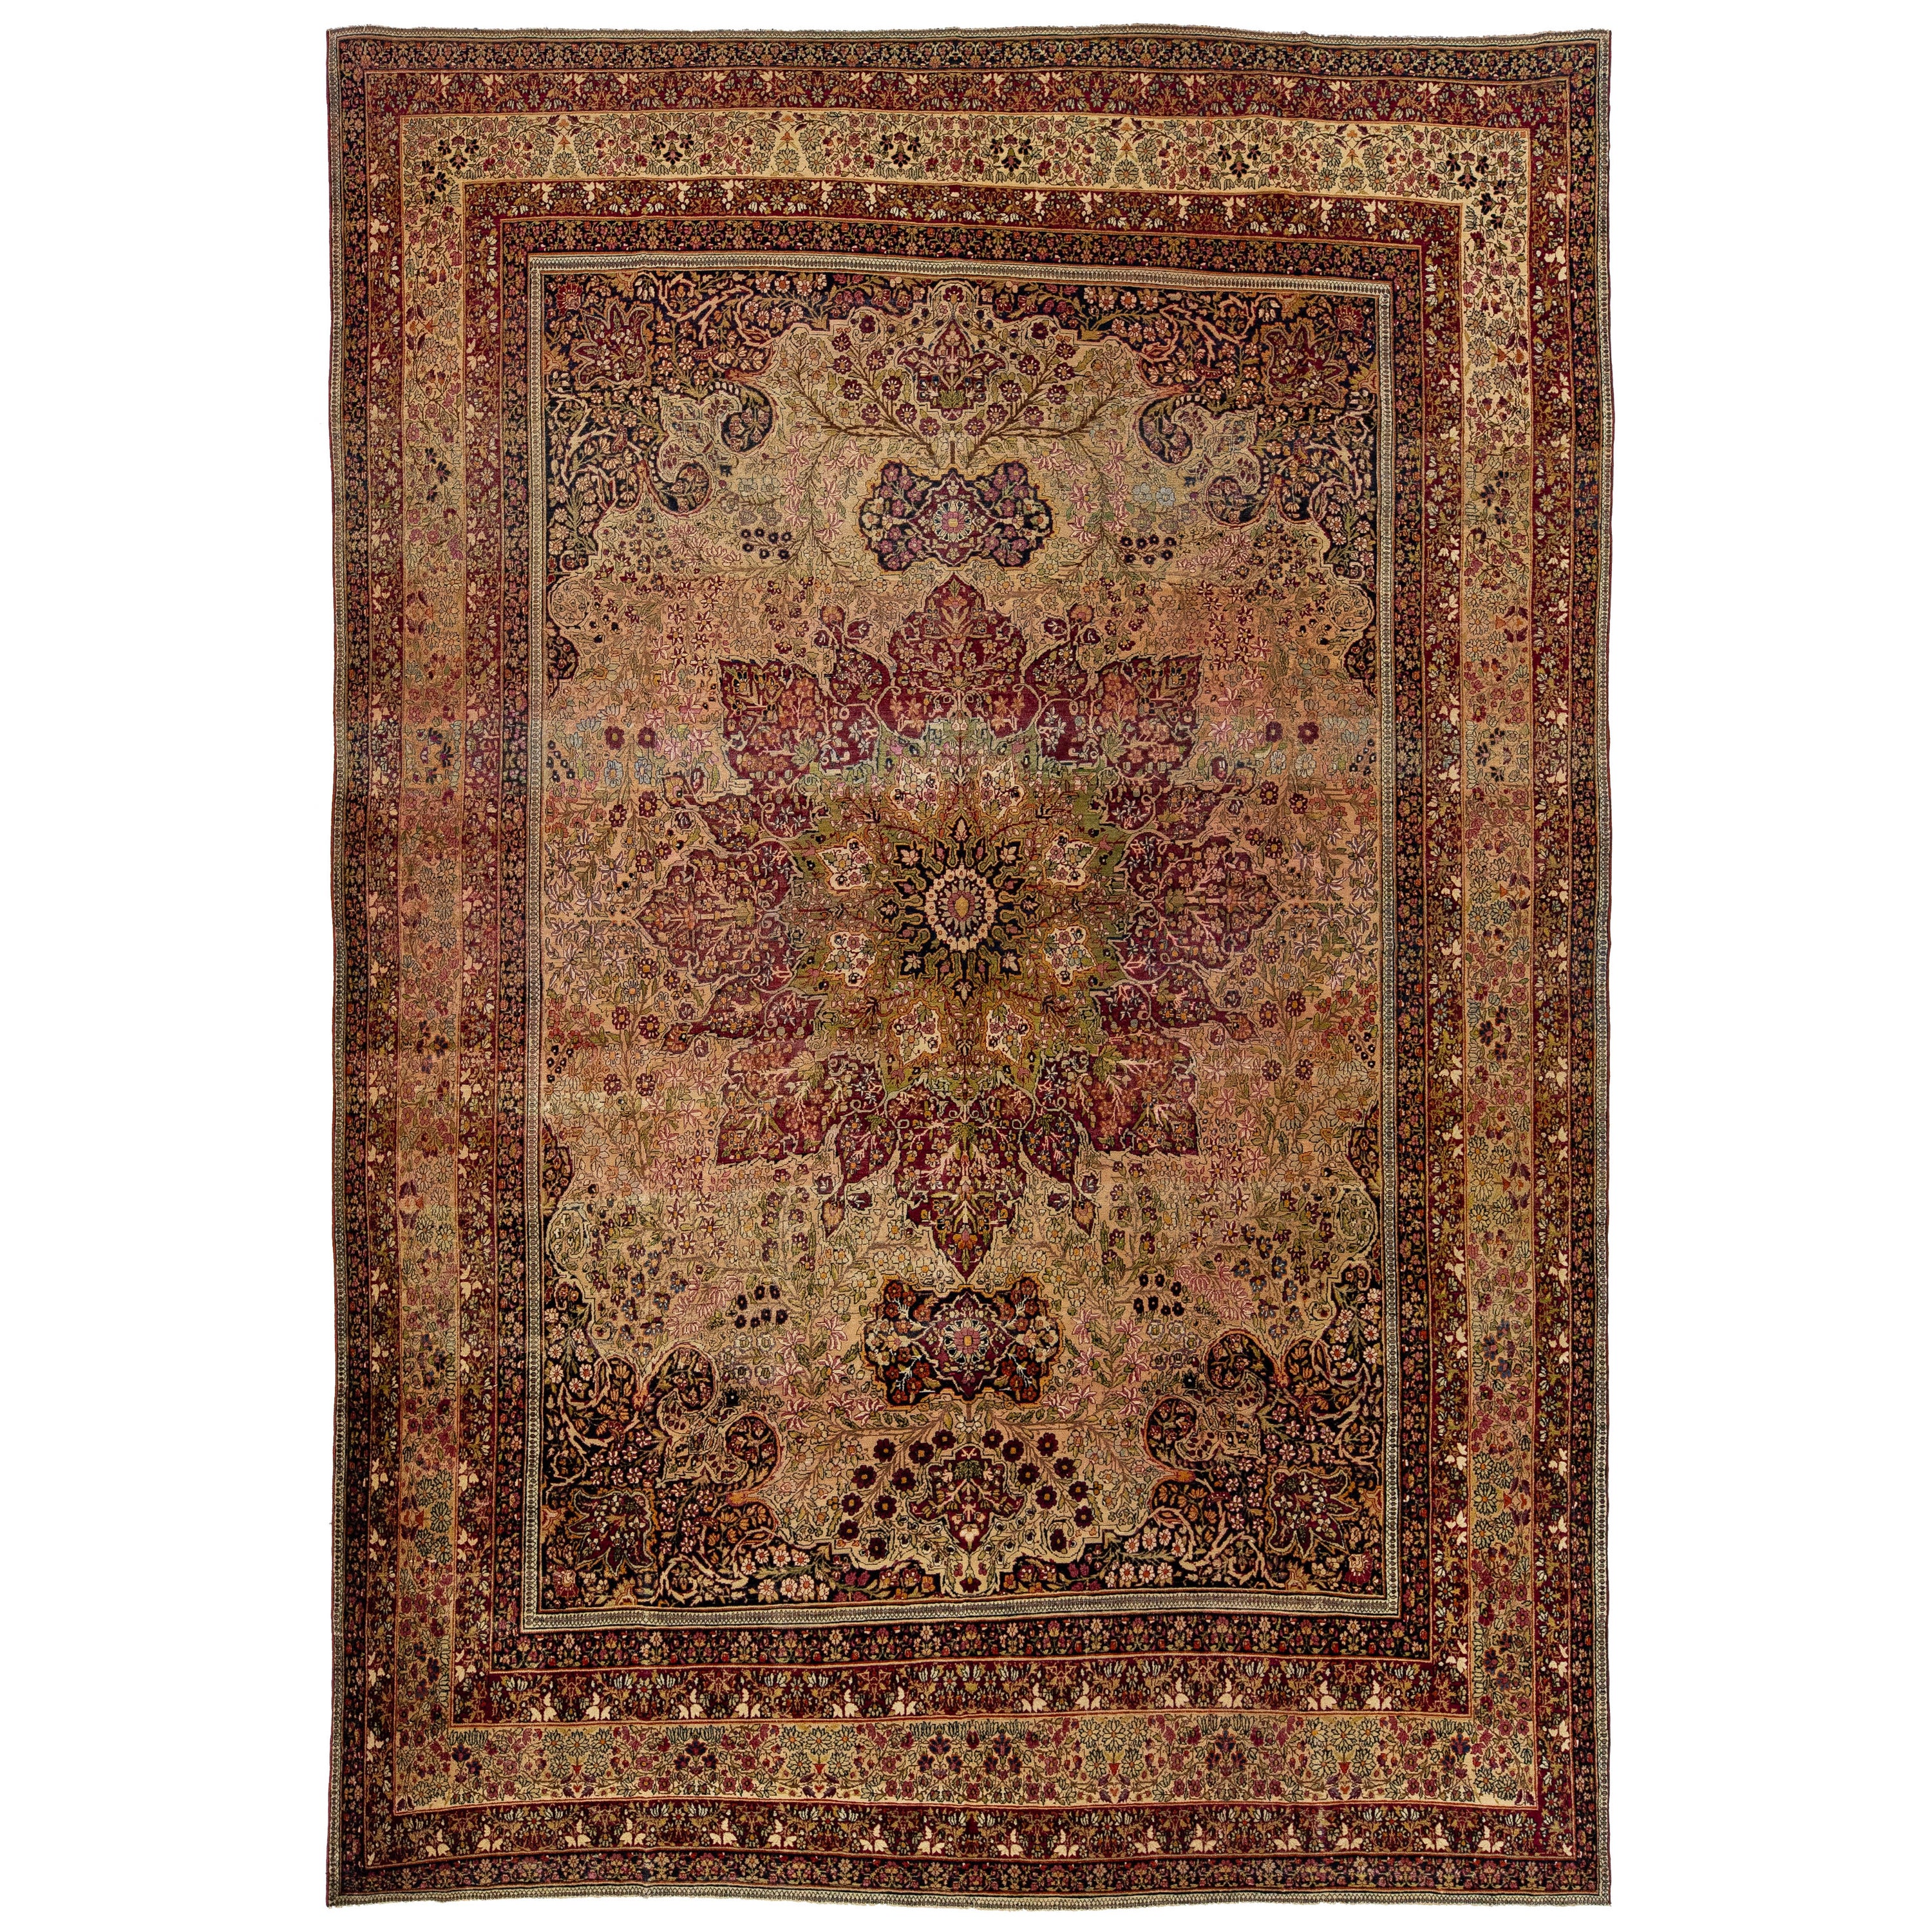 1880s Antique Persian Kerman Red Wool Rug Handmade Featuring a Rosette Motif  For Sale